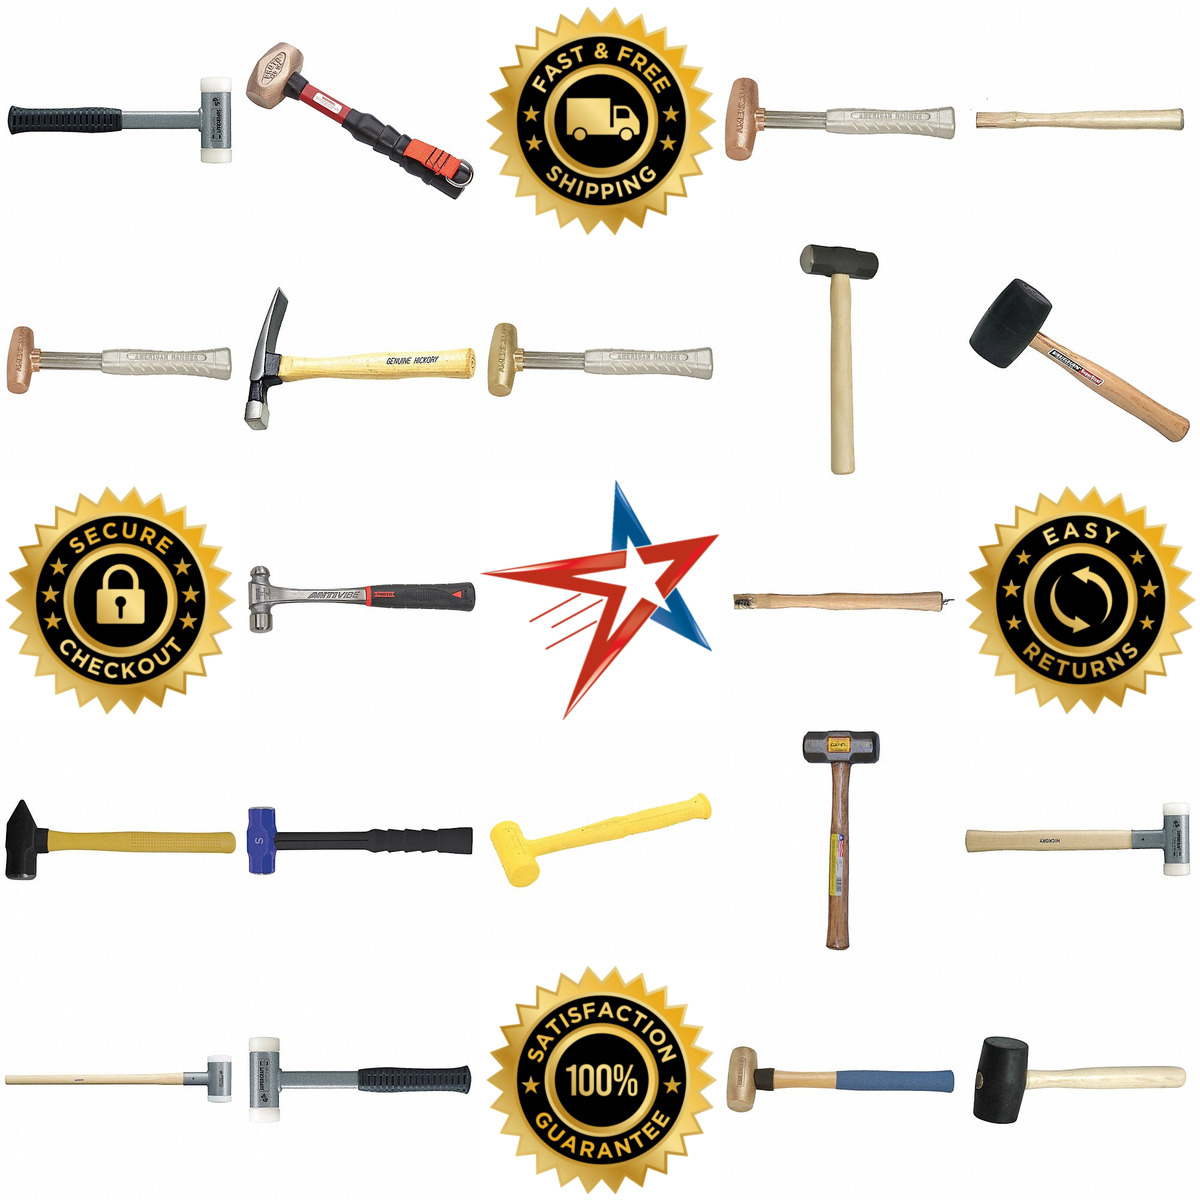 A selection of Hammers and Striking Tools products on GoVets